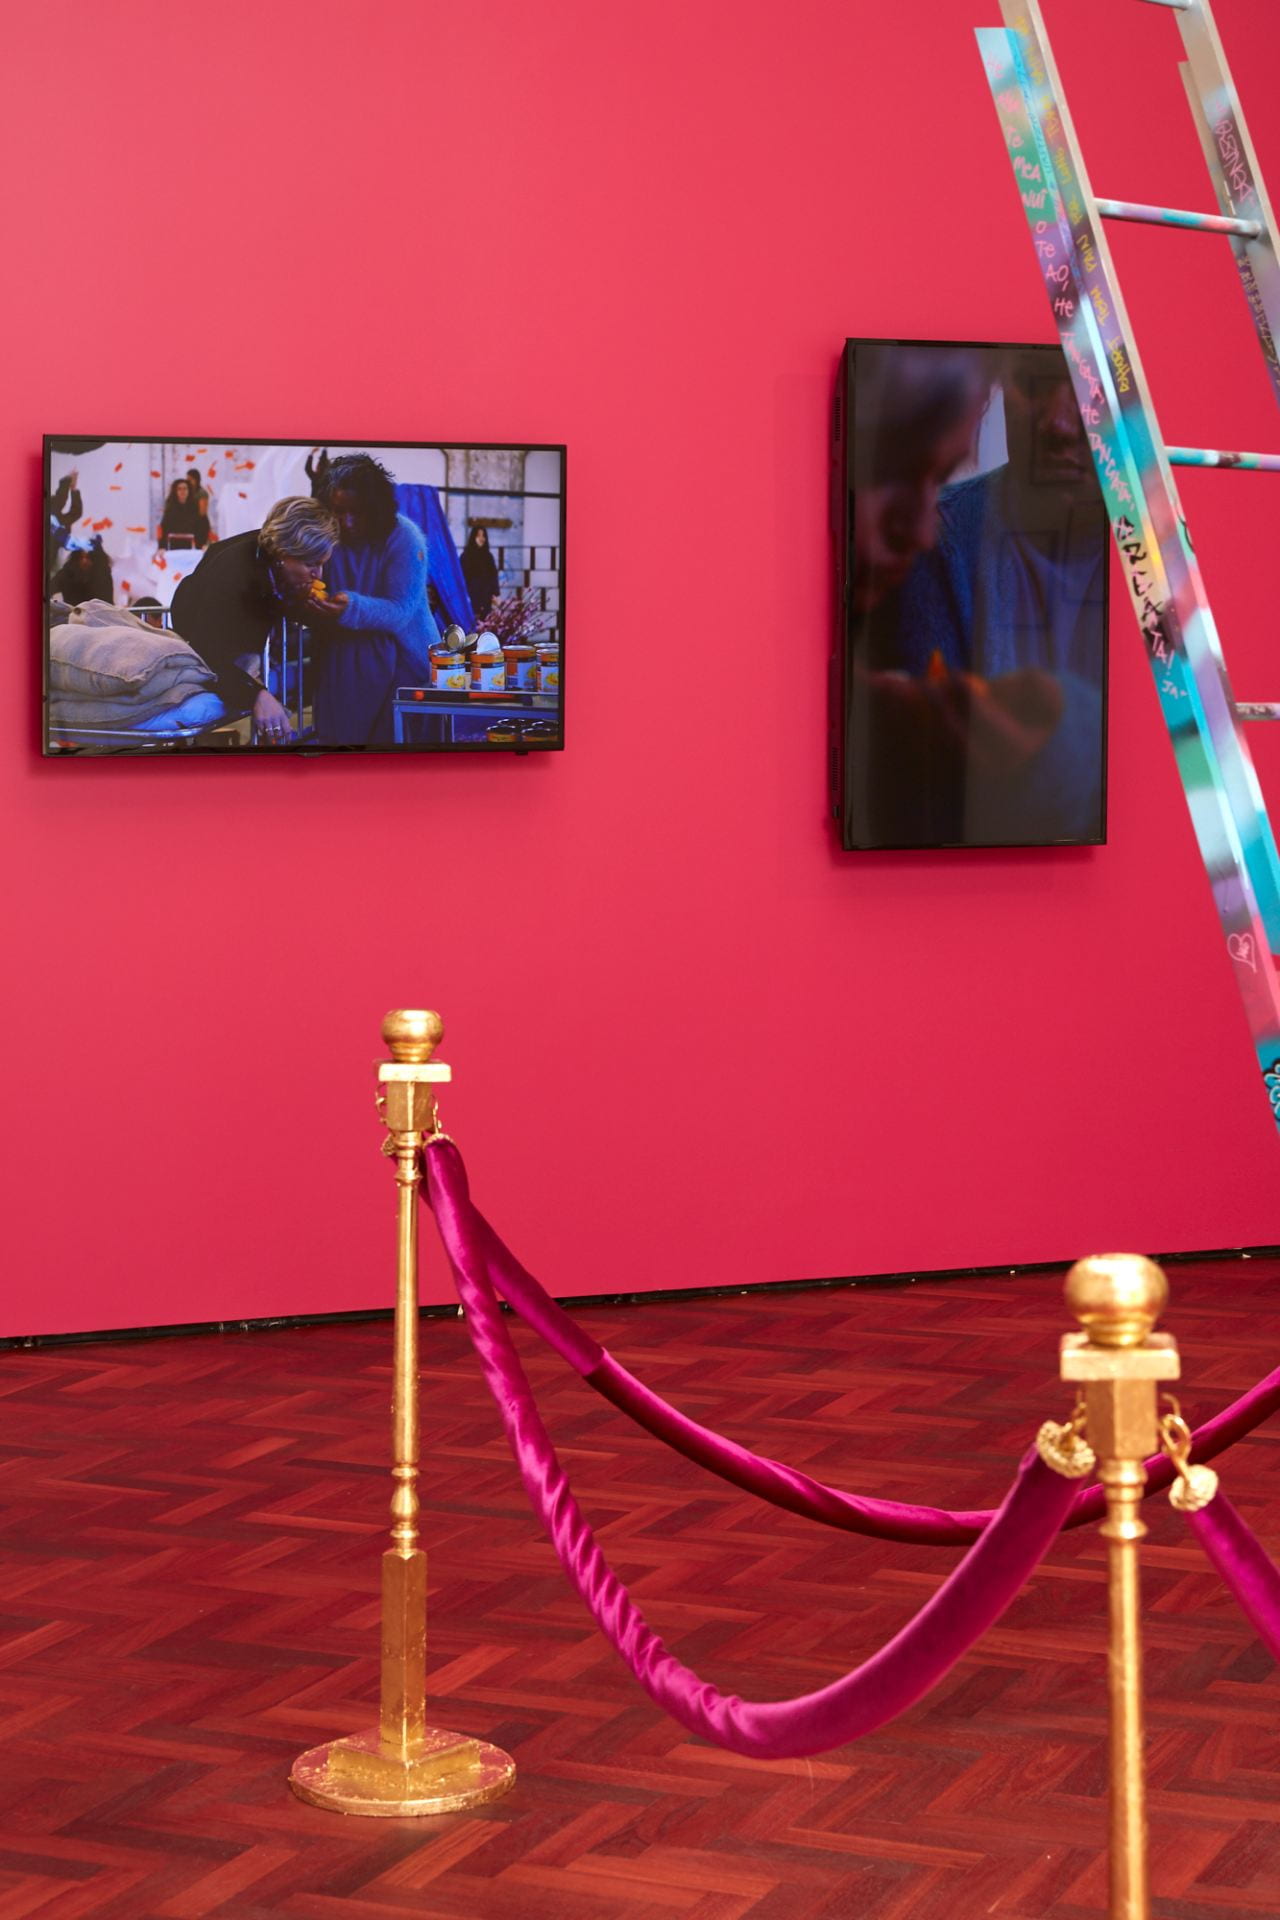 A hot pink wall with two TVs mounted on it, showing a silent montage of people in the throes of chaos, throwing packaged food, feeding one another and setting paper on fire.